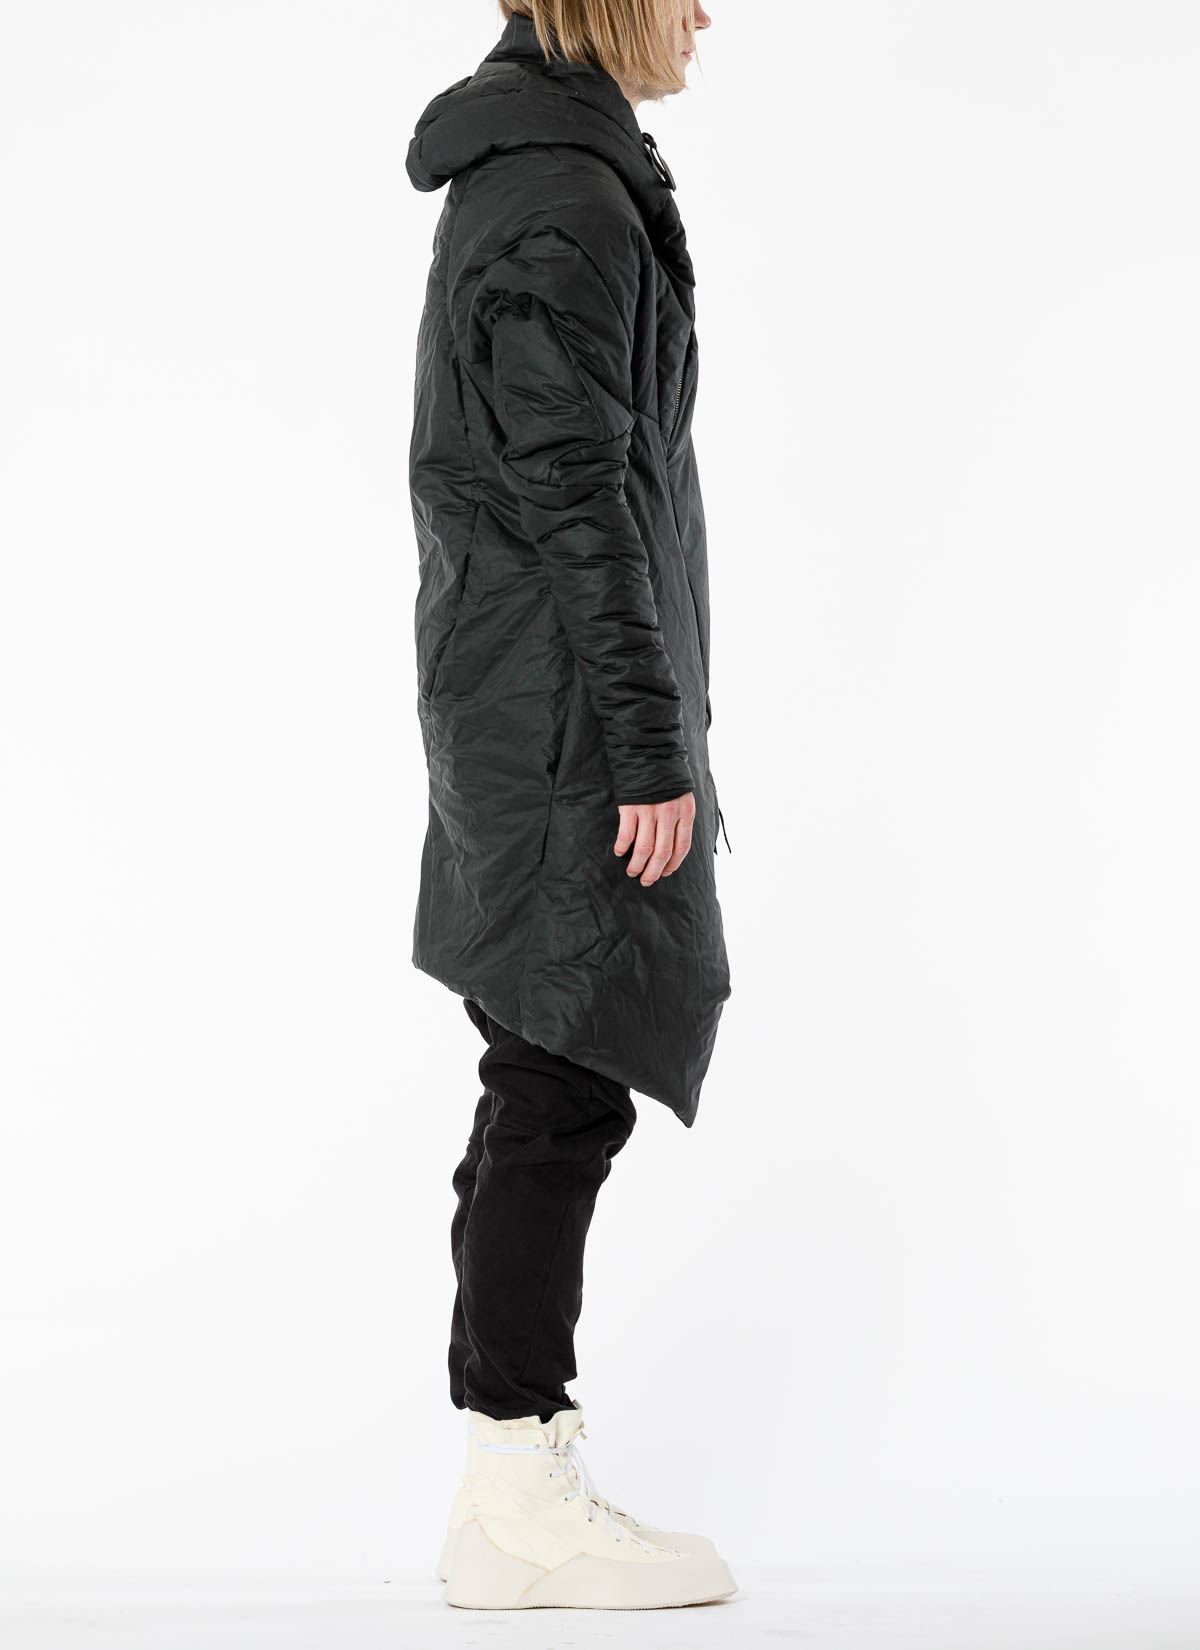 EMANUEL cotton hide-m | Curved Coat, LEON waxed Hooded BLANCK